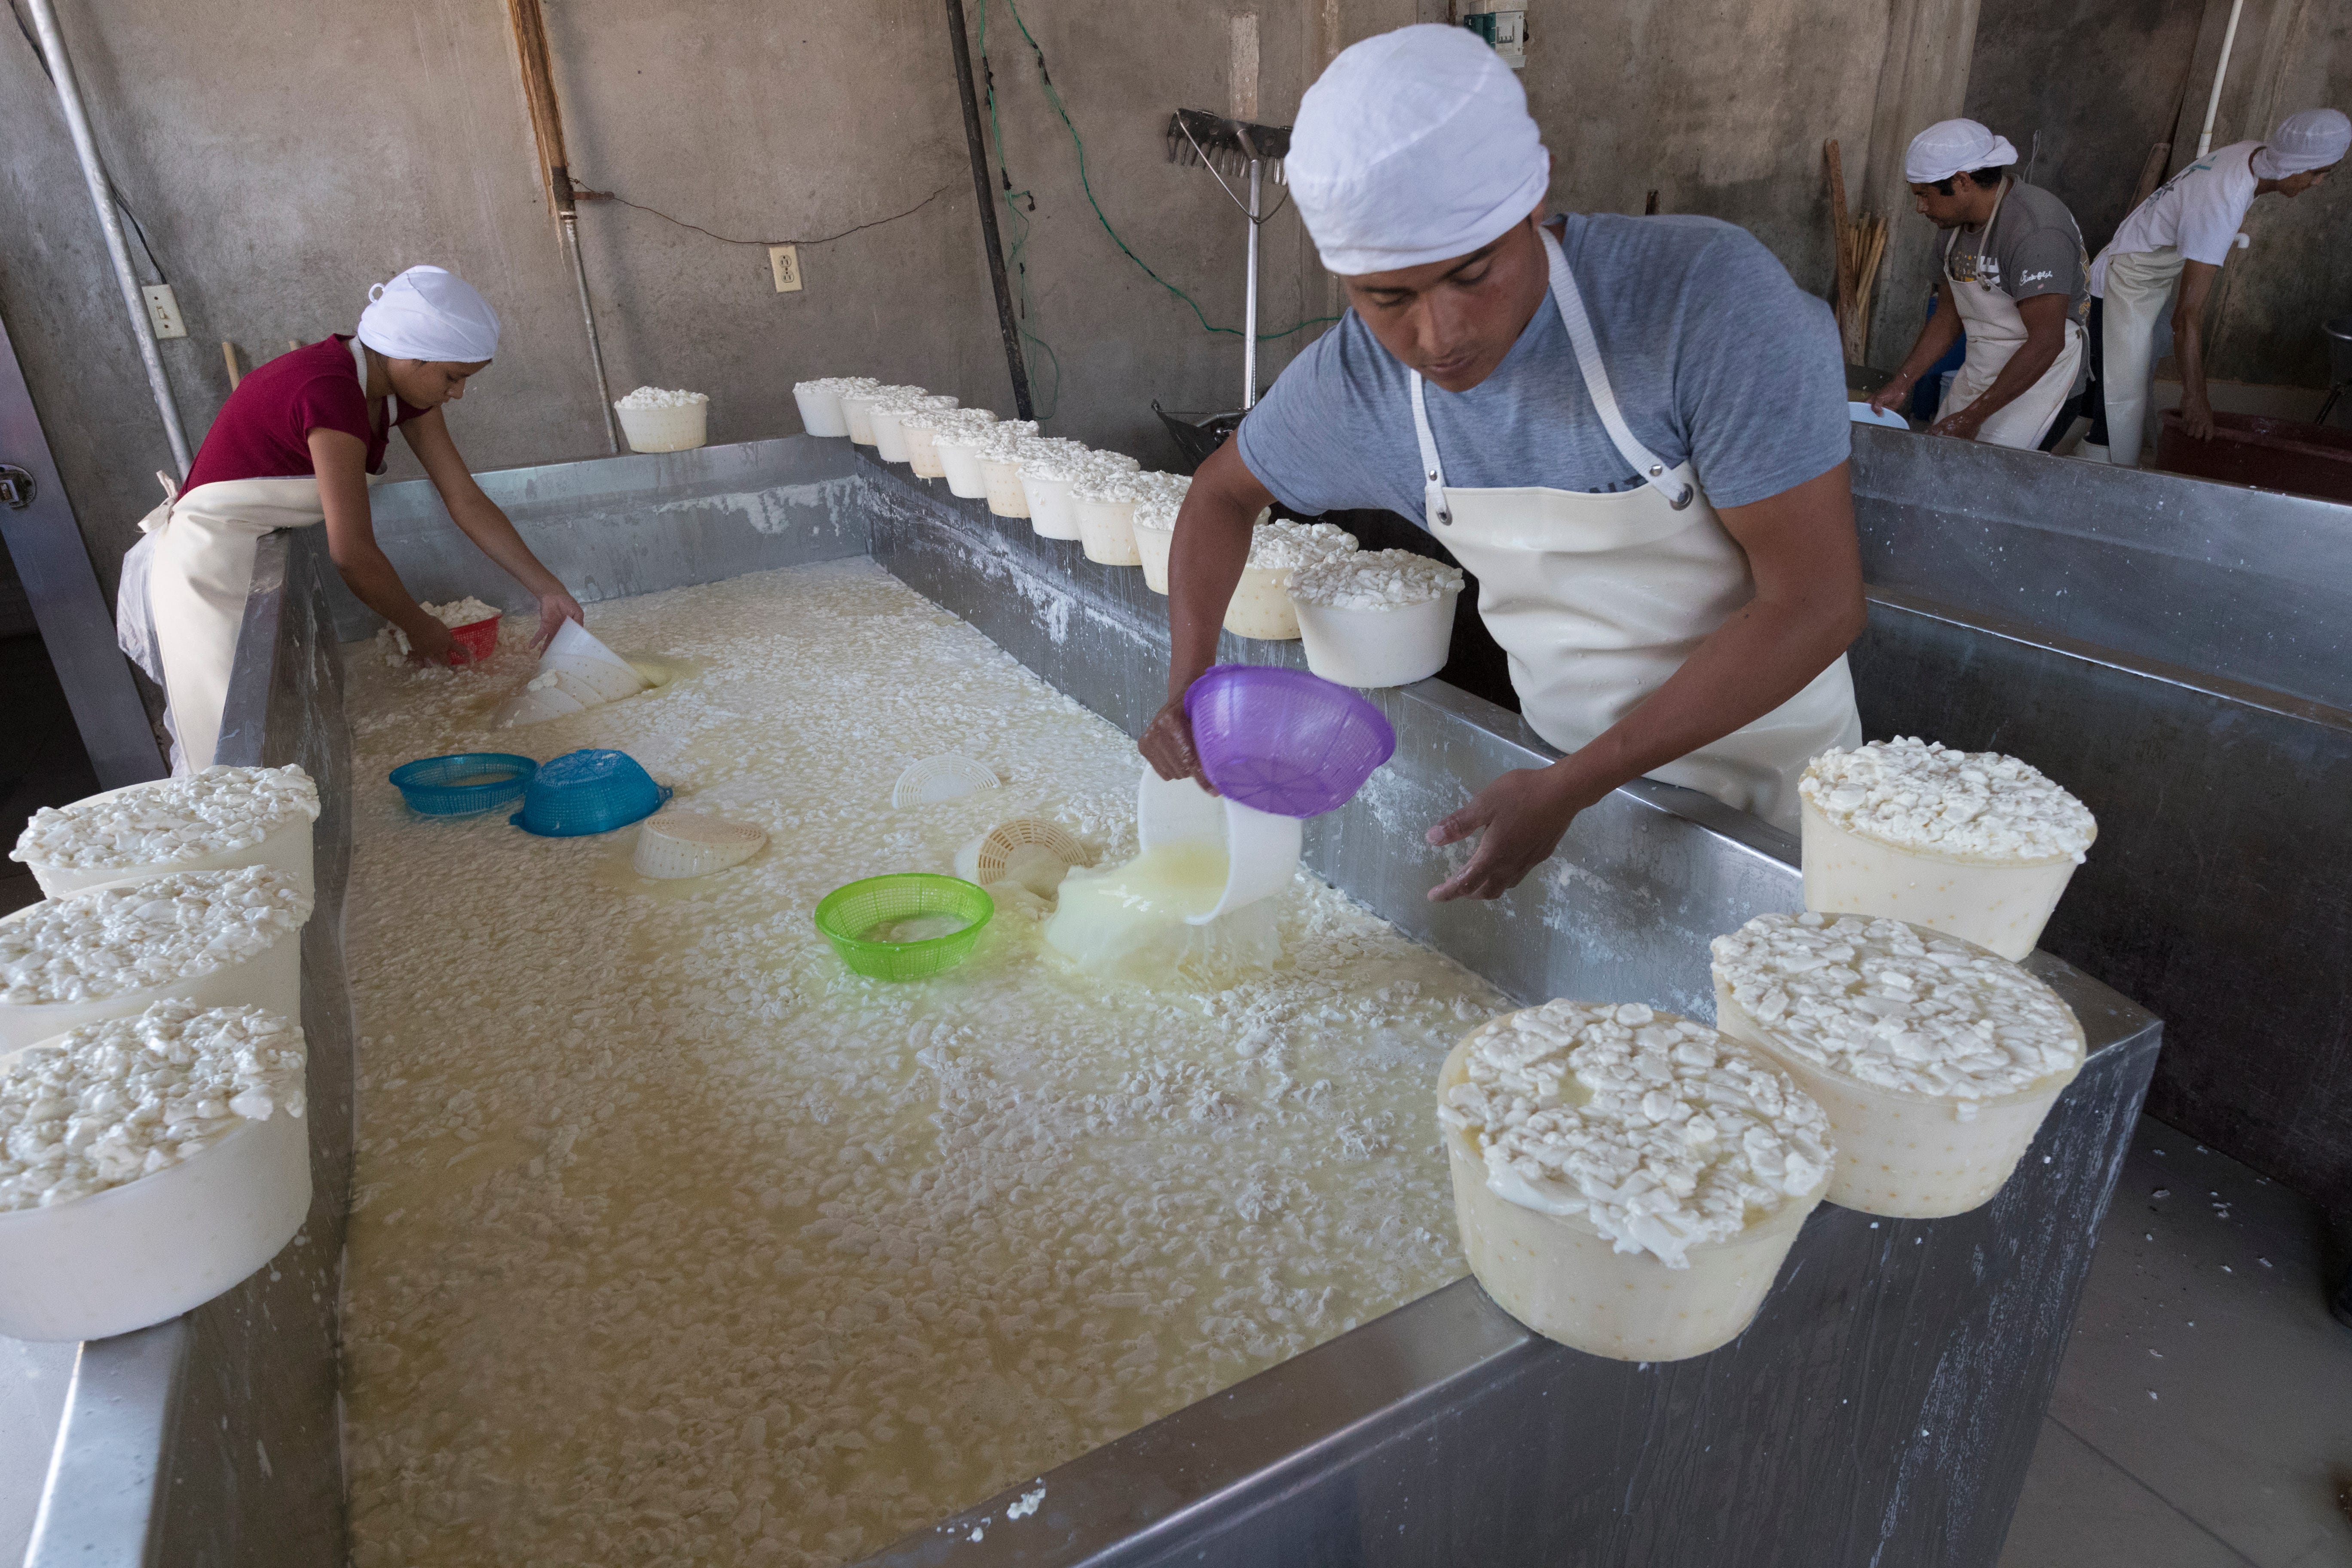 Workers fill tubs with fresh curds in Tizayuca, Mexico.